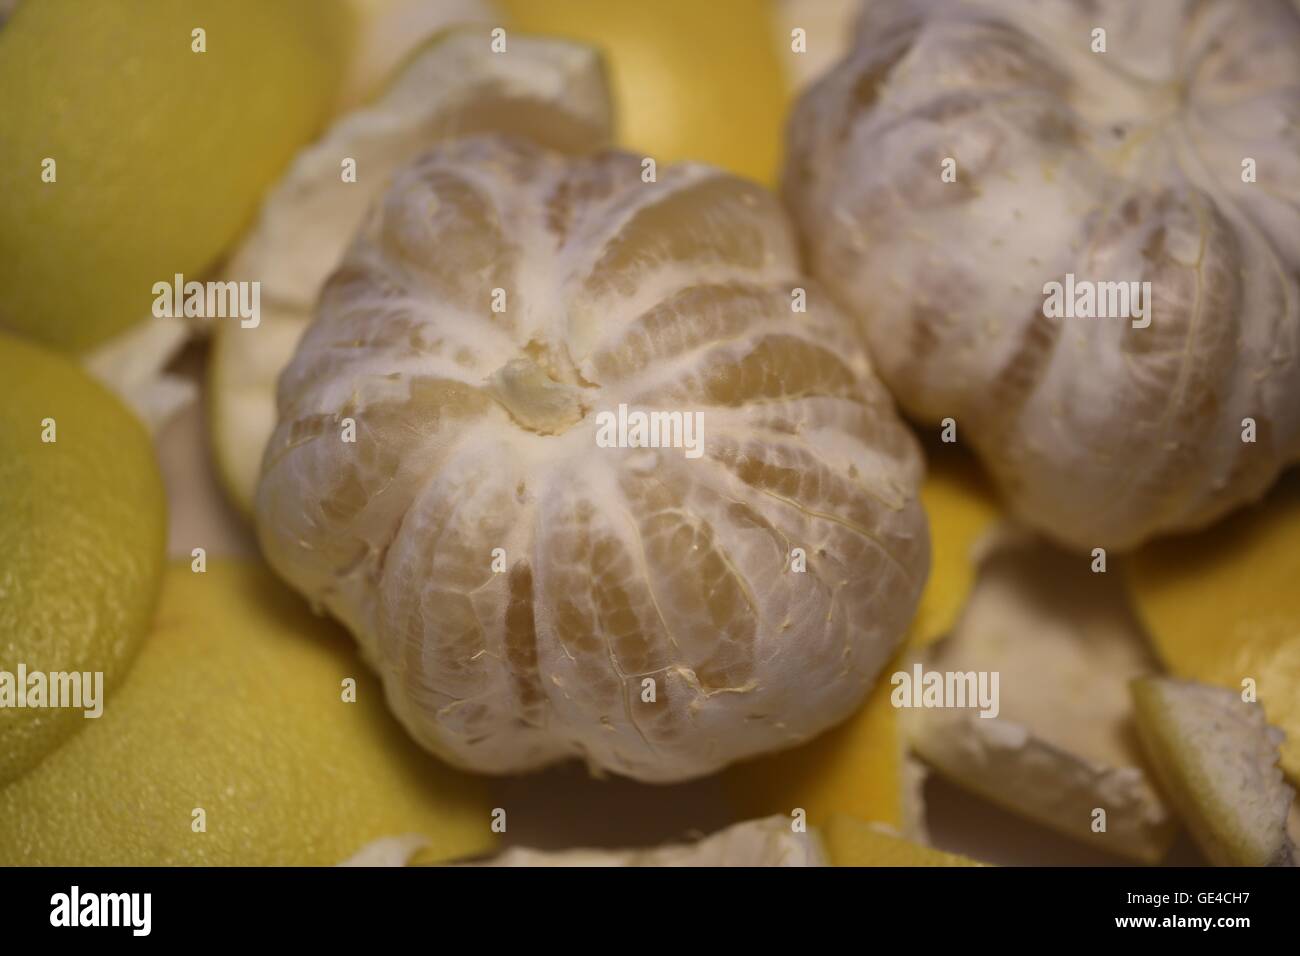 Sweetie. Sweetie - hybridization of grapefruit and pomelo. Fresh peeled sweetie without the thick peel, before separating the individual segments. Stock Photo